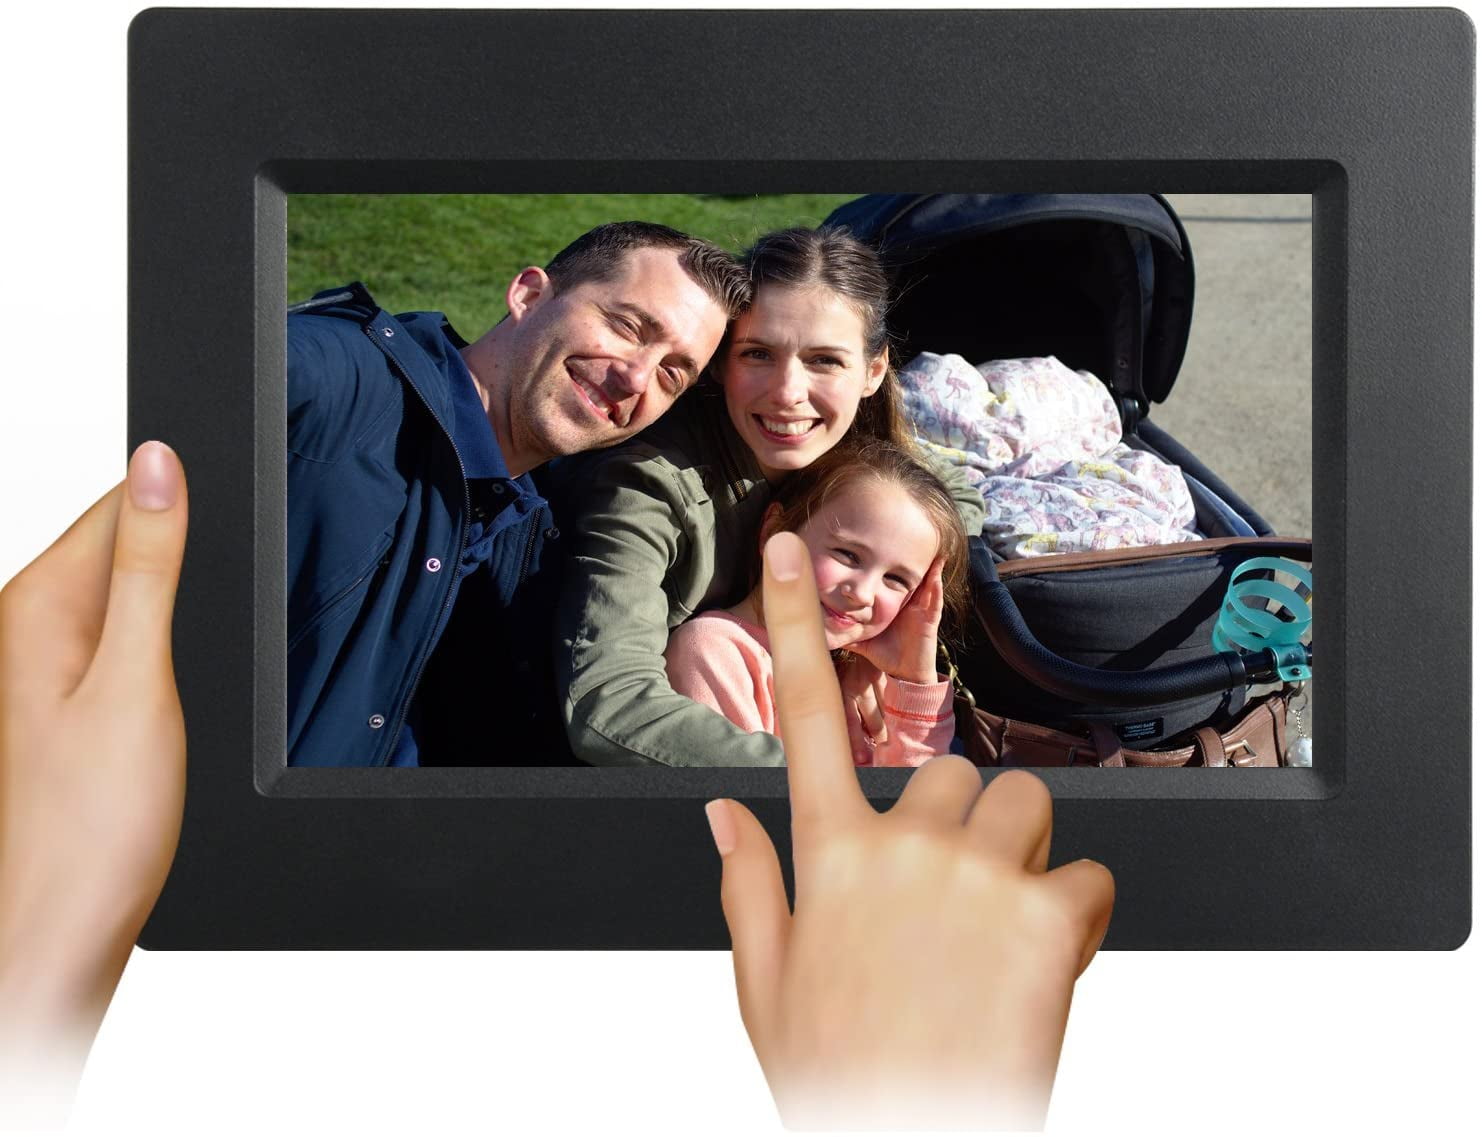 Portrait&Landscape White Built in 8GB Memory IPS LCD Panel Feelcare 10 Inch Smart Wifi Digital Photo Frame with Touch Screen Ltd HN-DPF1000 WHITE Wall-Mountable Instantly Sharing Moments